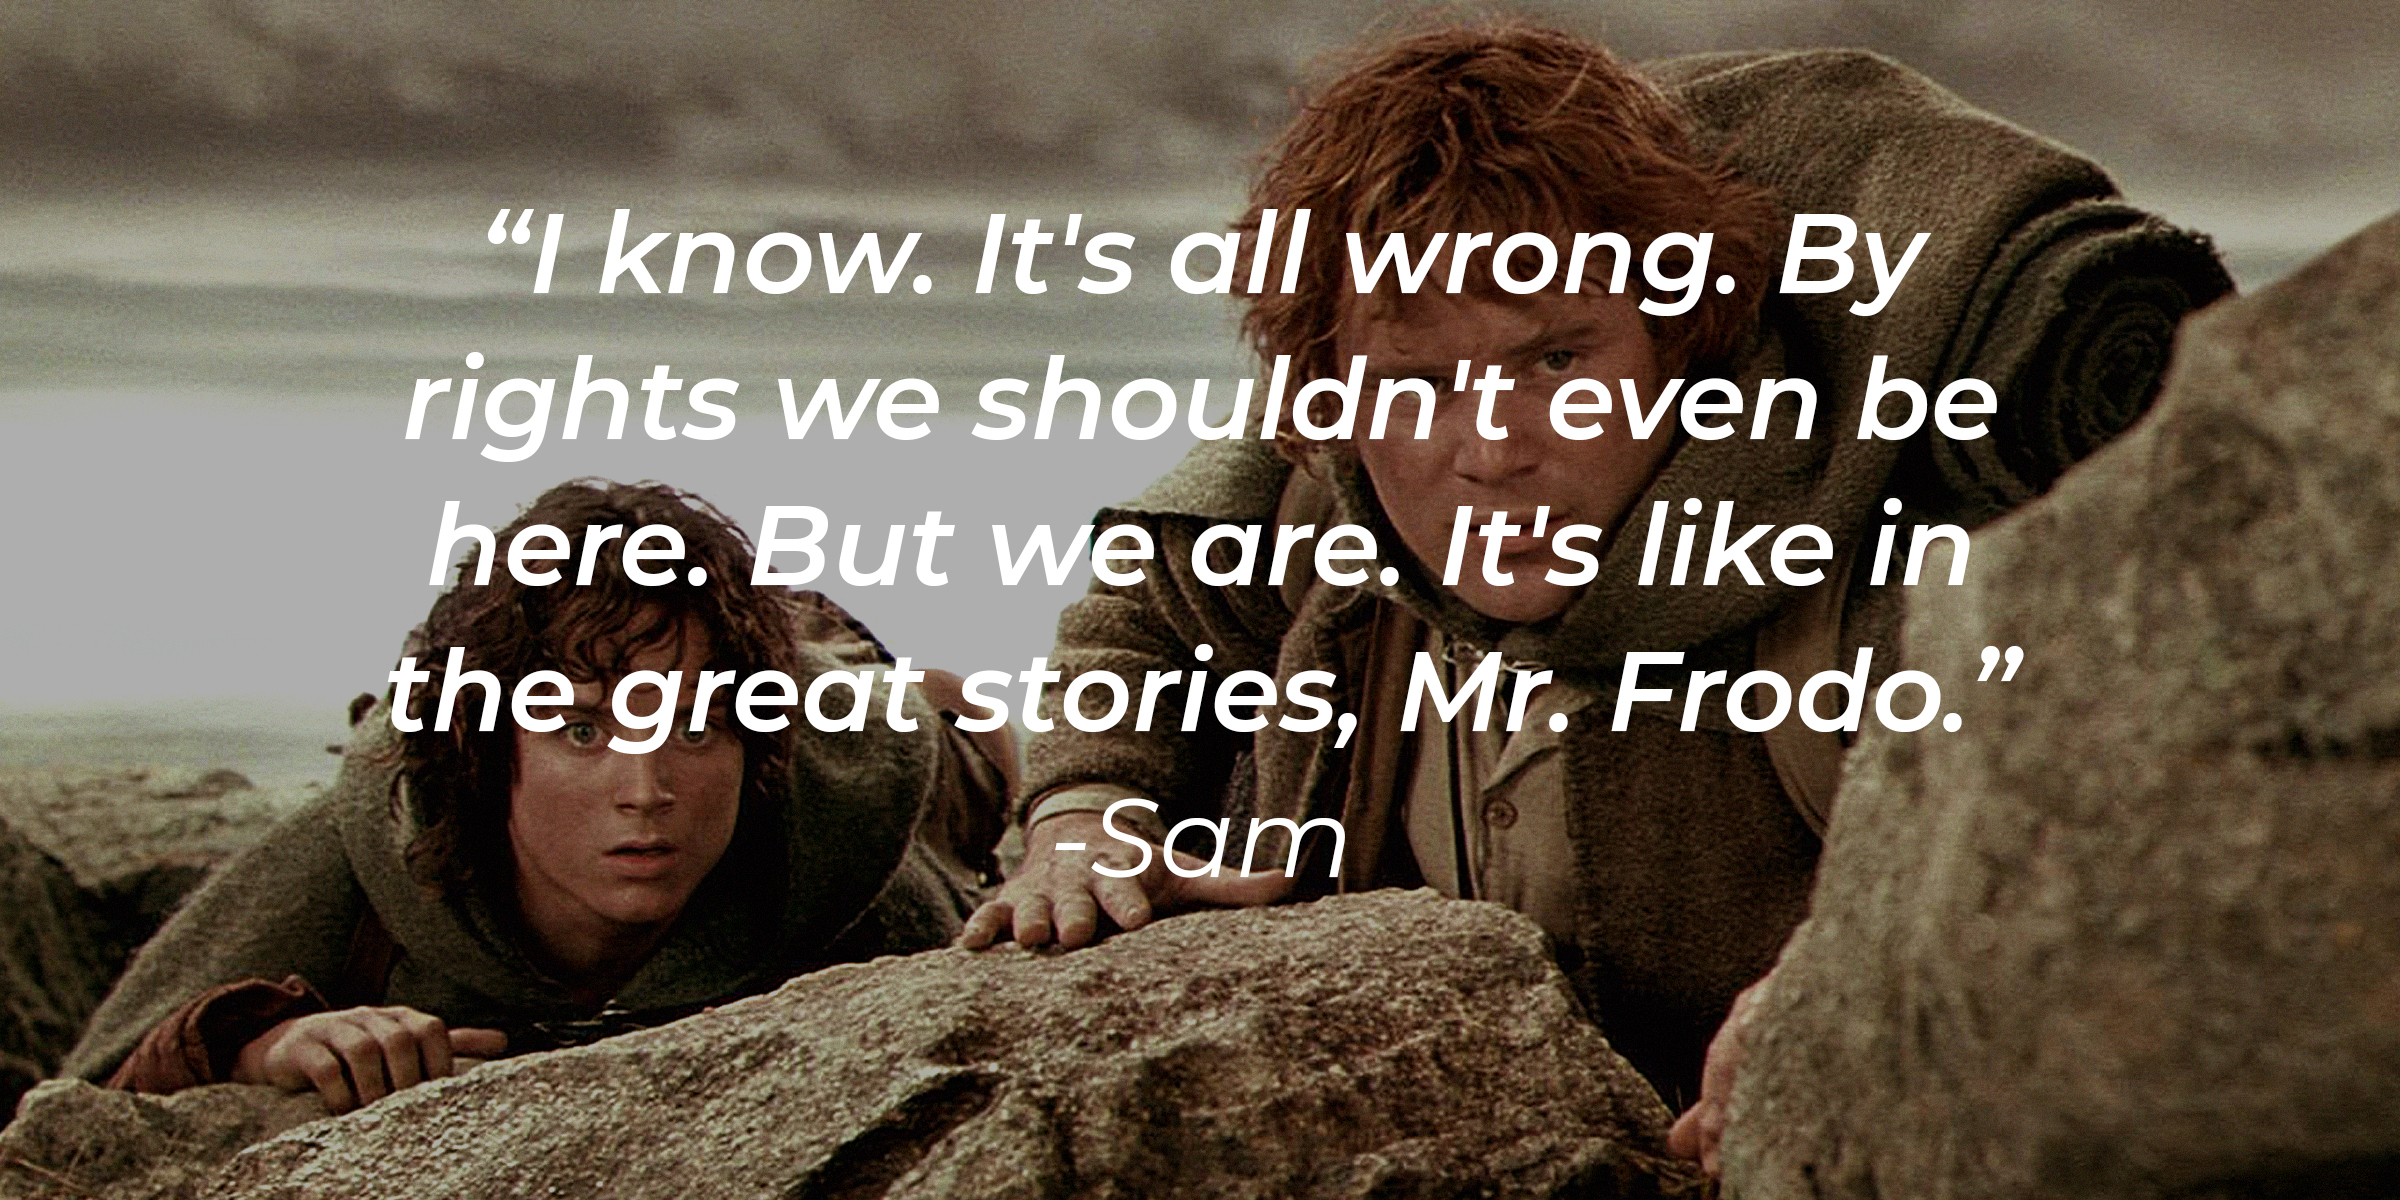 Sam and Frodo, with Sam's Quote: "I know. It's all wrong. By rights, we shouldn't even be here. But we are. It's like in the great stories, Mr. Frodo." | Source: facebook.com/lordoftheringstrilogy